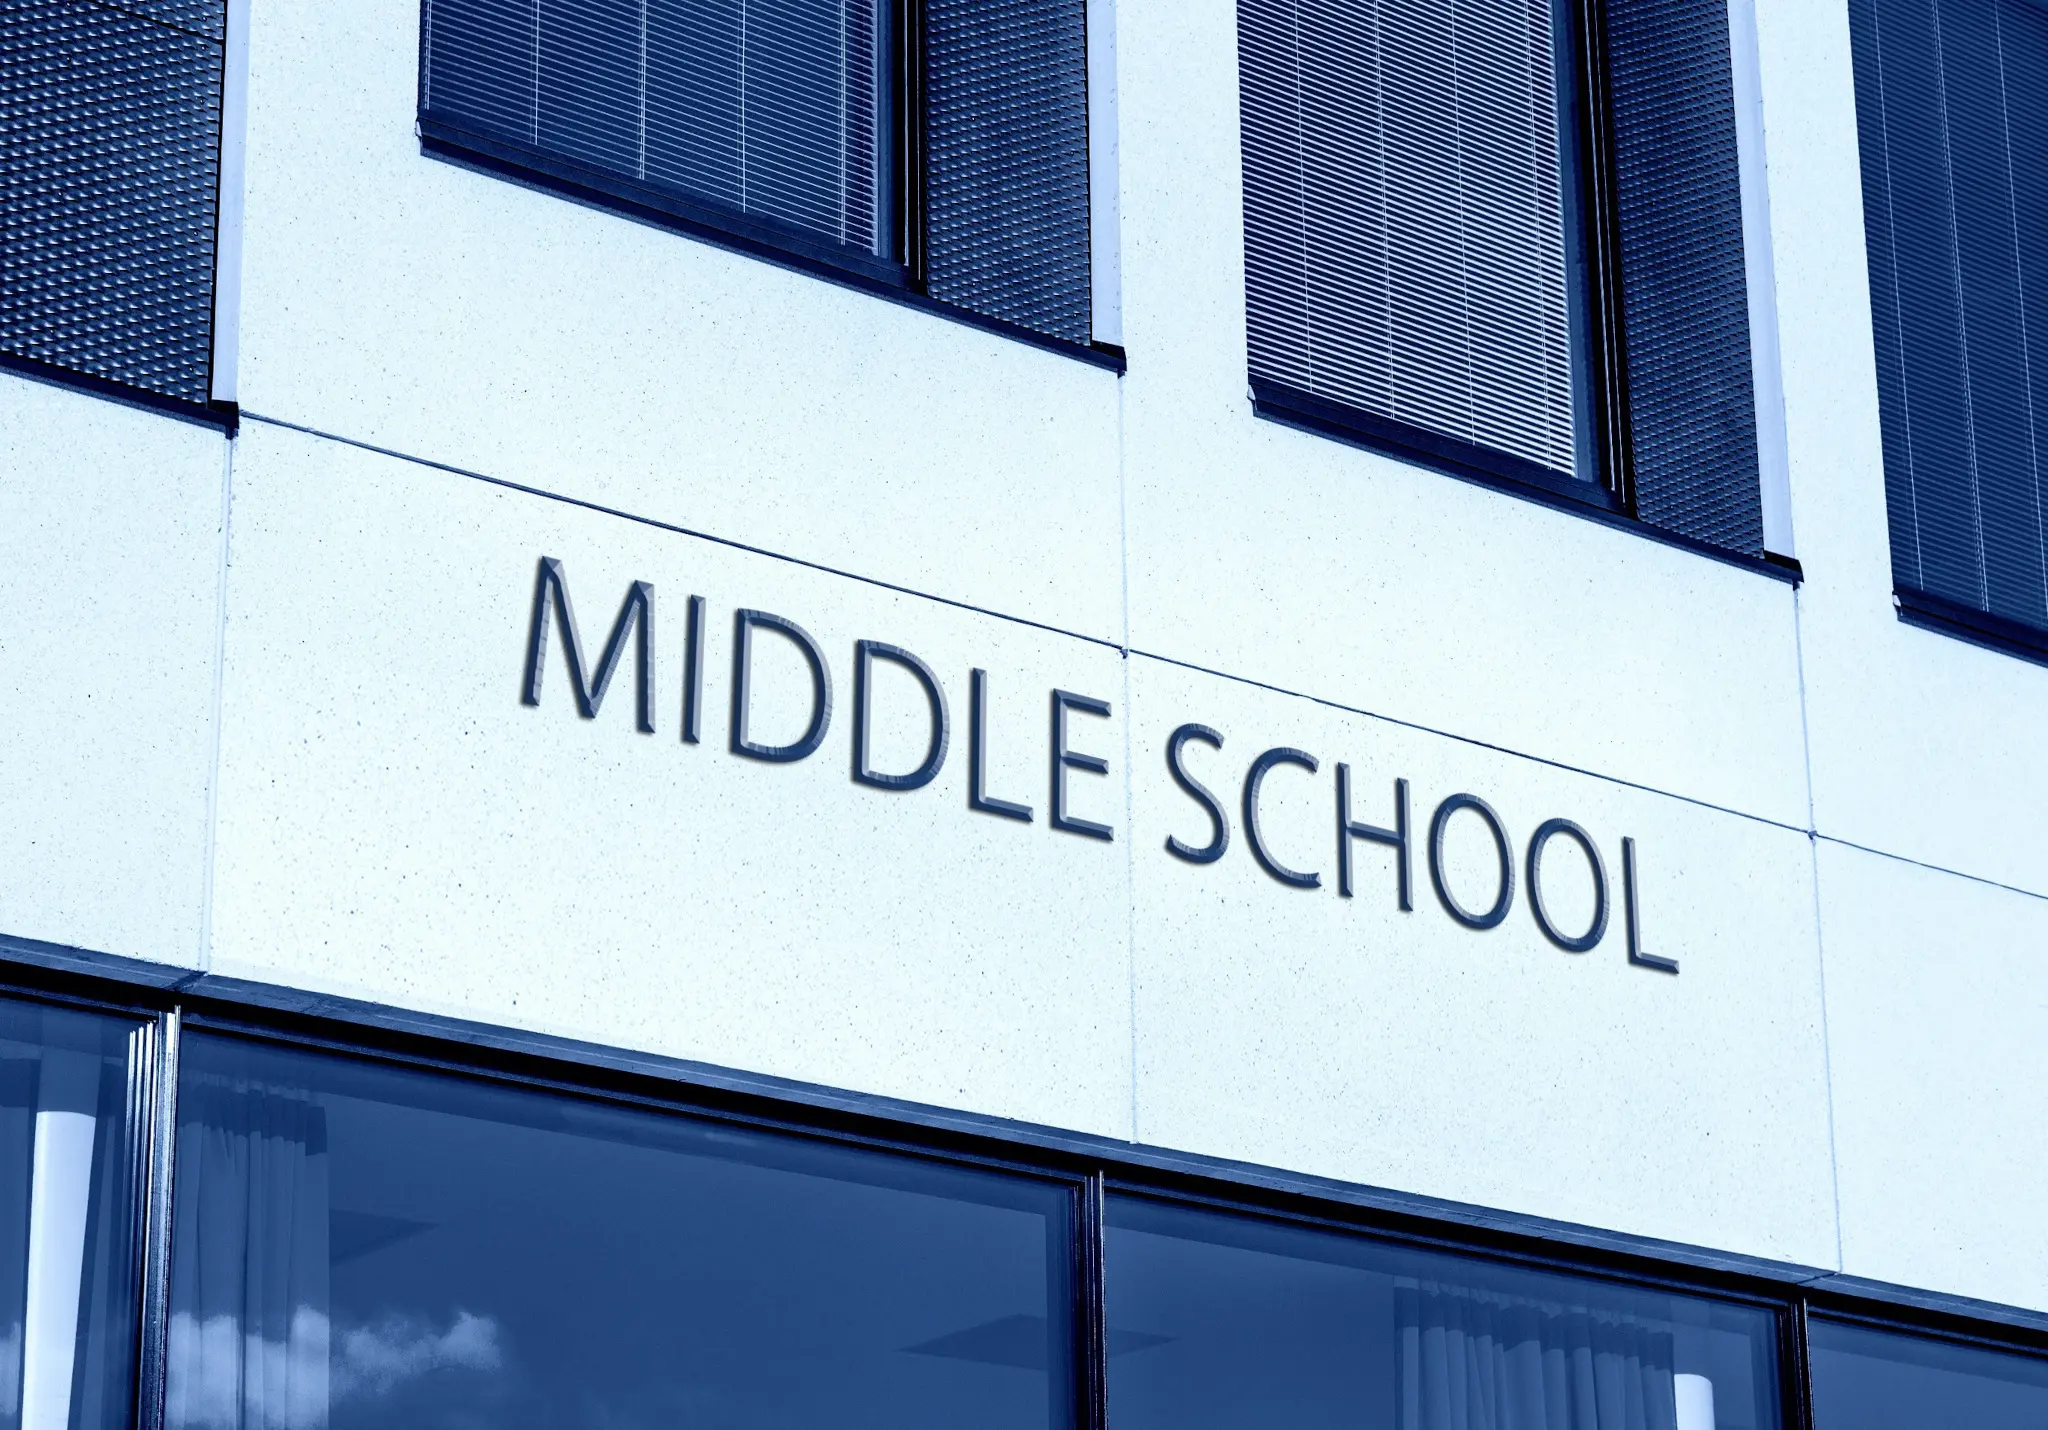 Debate topics for middle school students